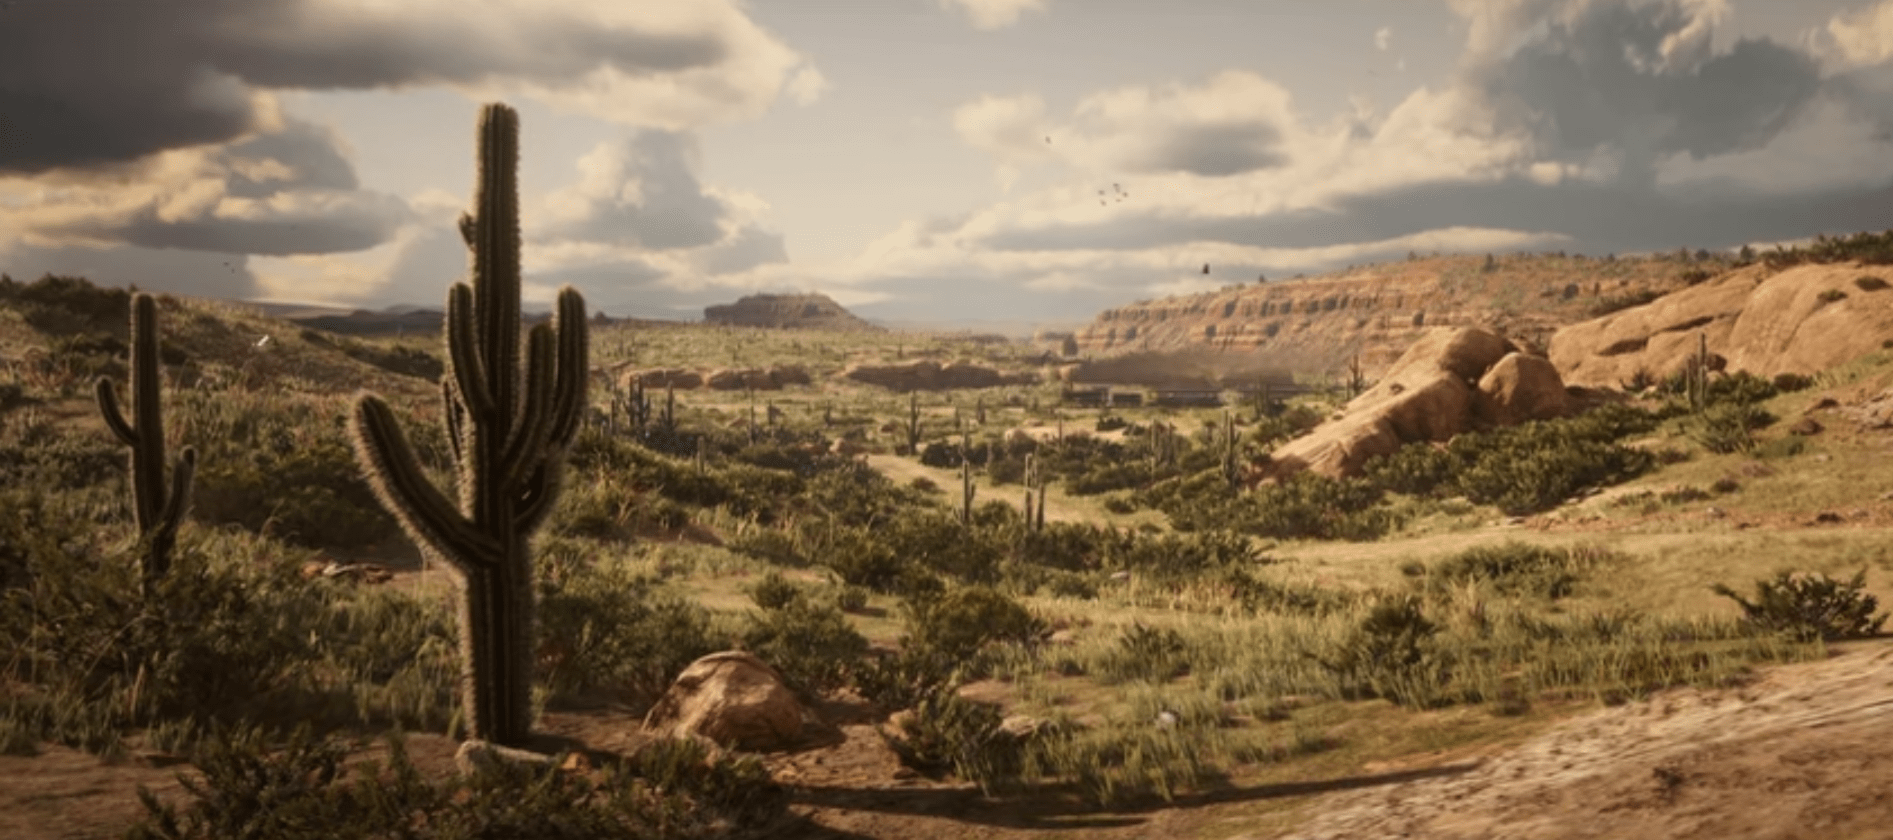 PC’s Red Dead Redemption 2 Title Update 1.14 Is Filled With Bug Fixes, Including A Work Around To Alleviate Stuttering